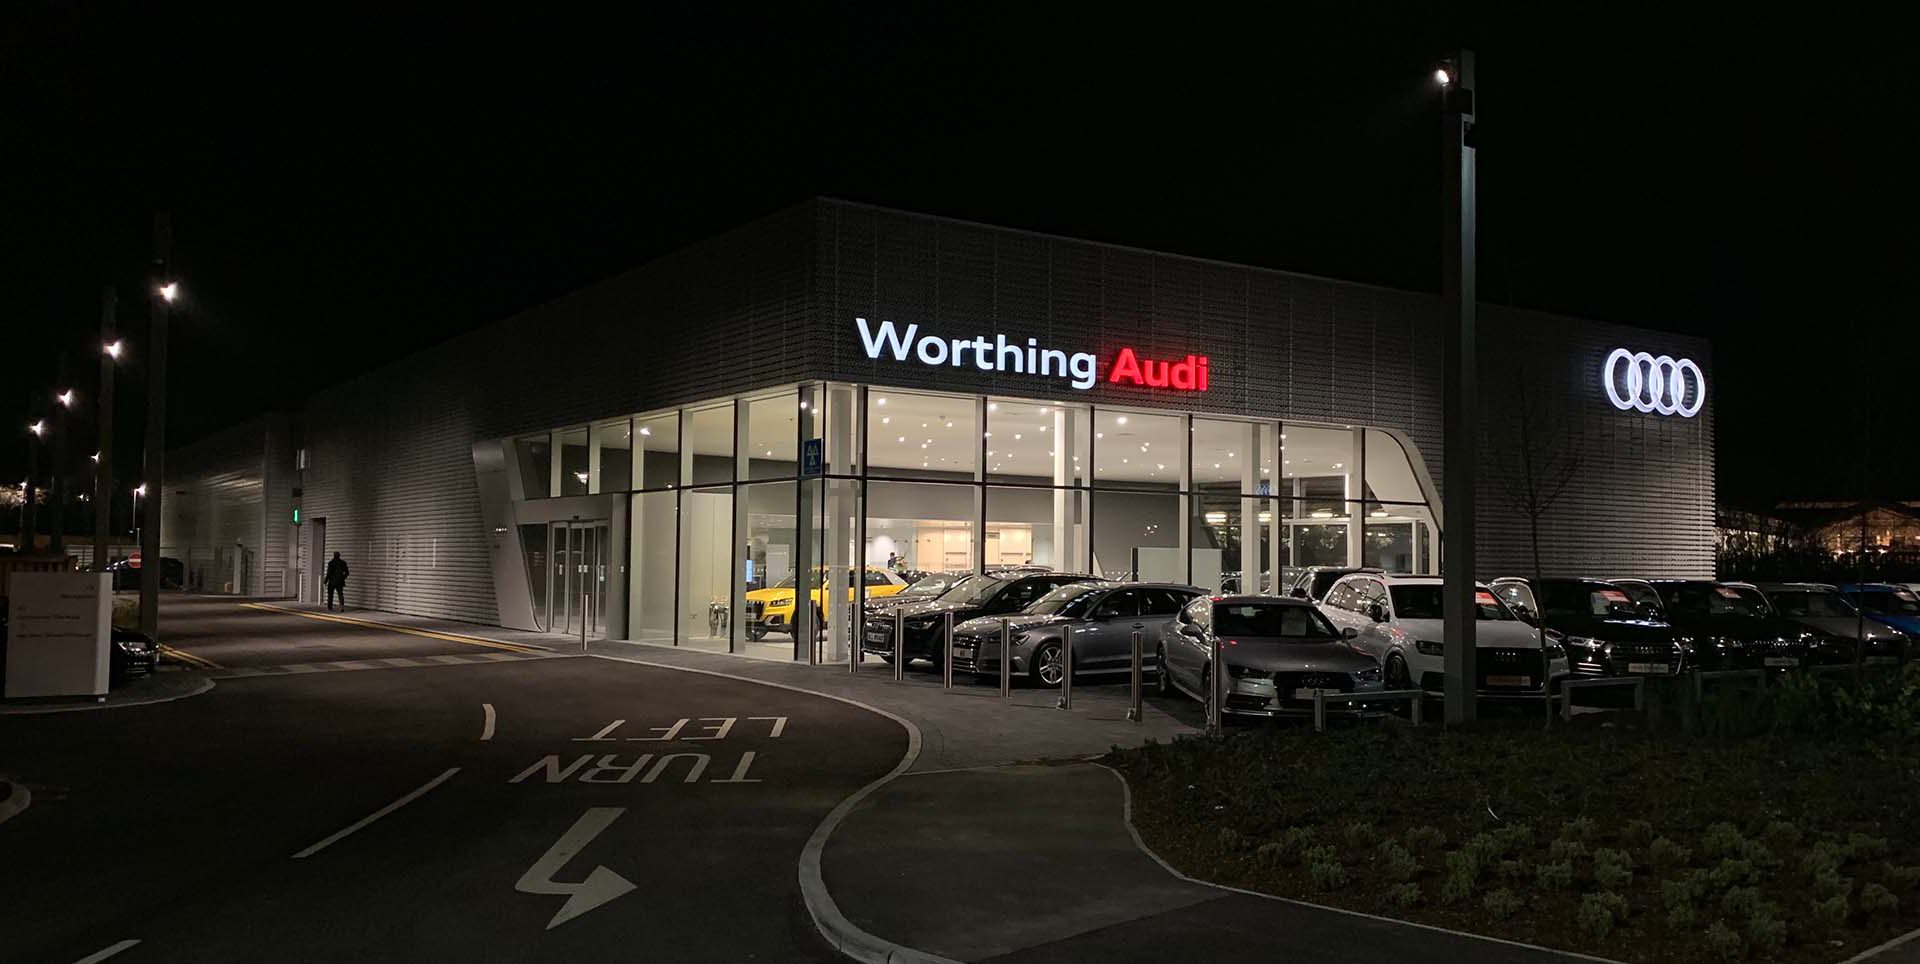 Caffyns Worthing Audi, Angmering, from Eastbourne Car Auctions and Caffyns for paid-for press release, Feb 2022